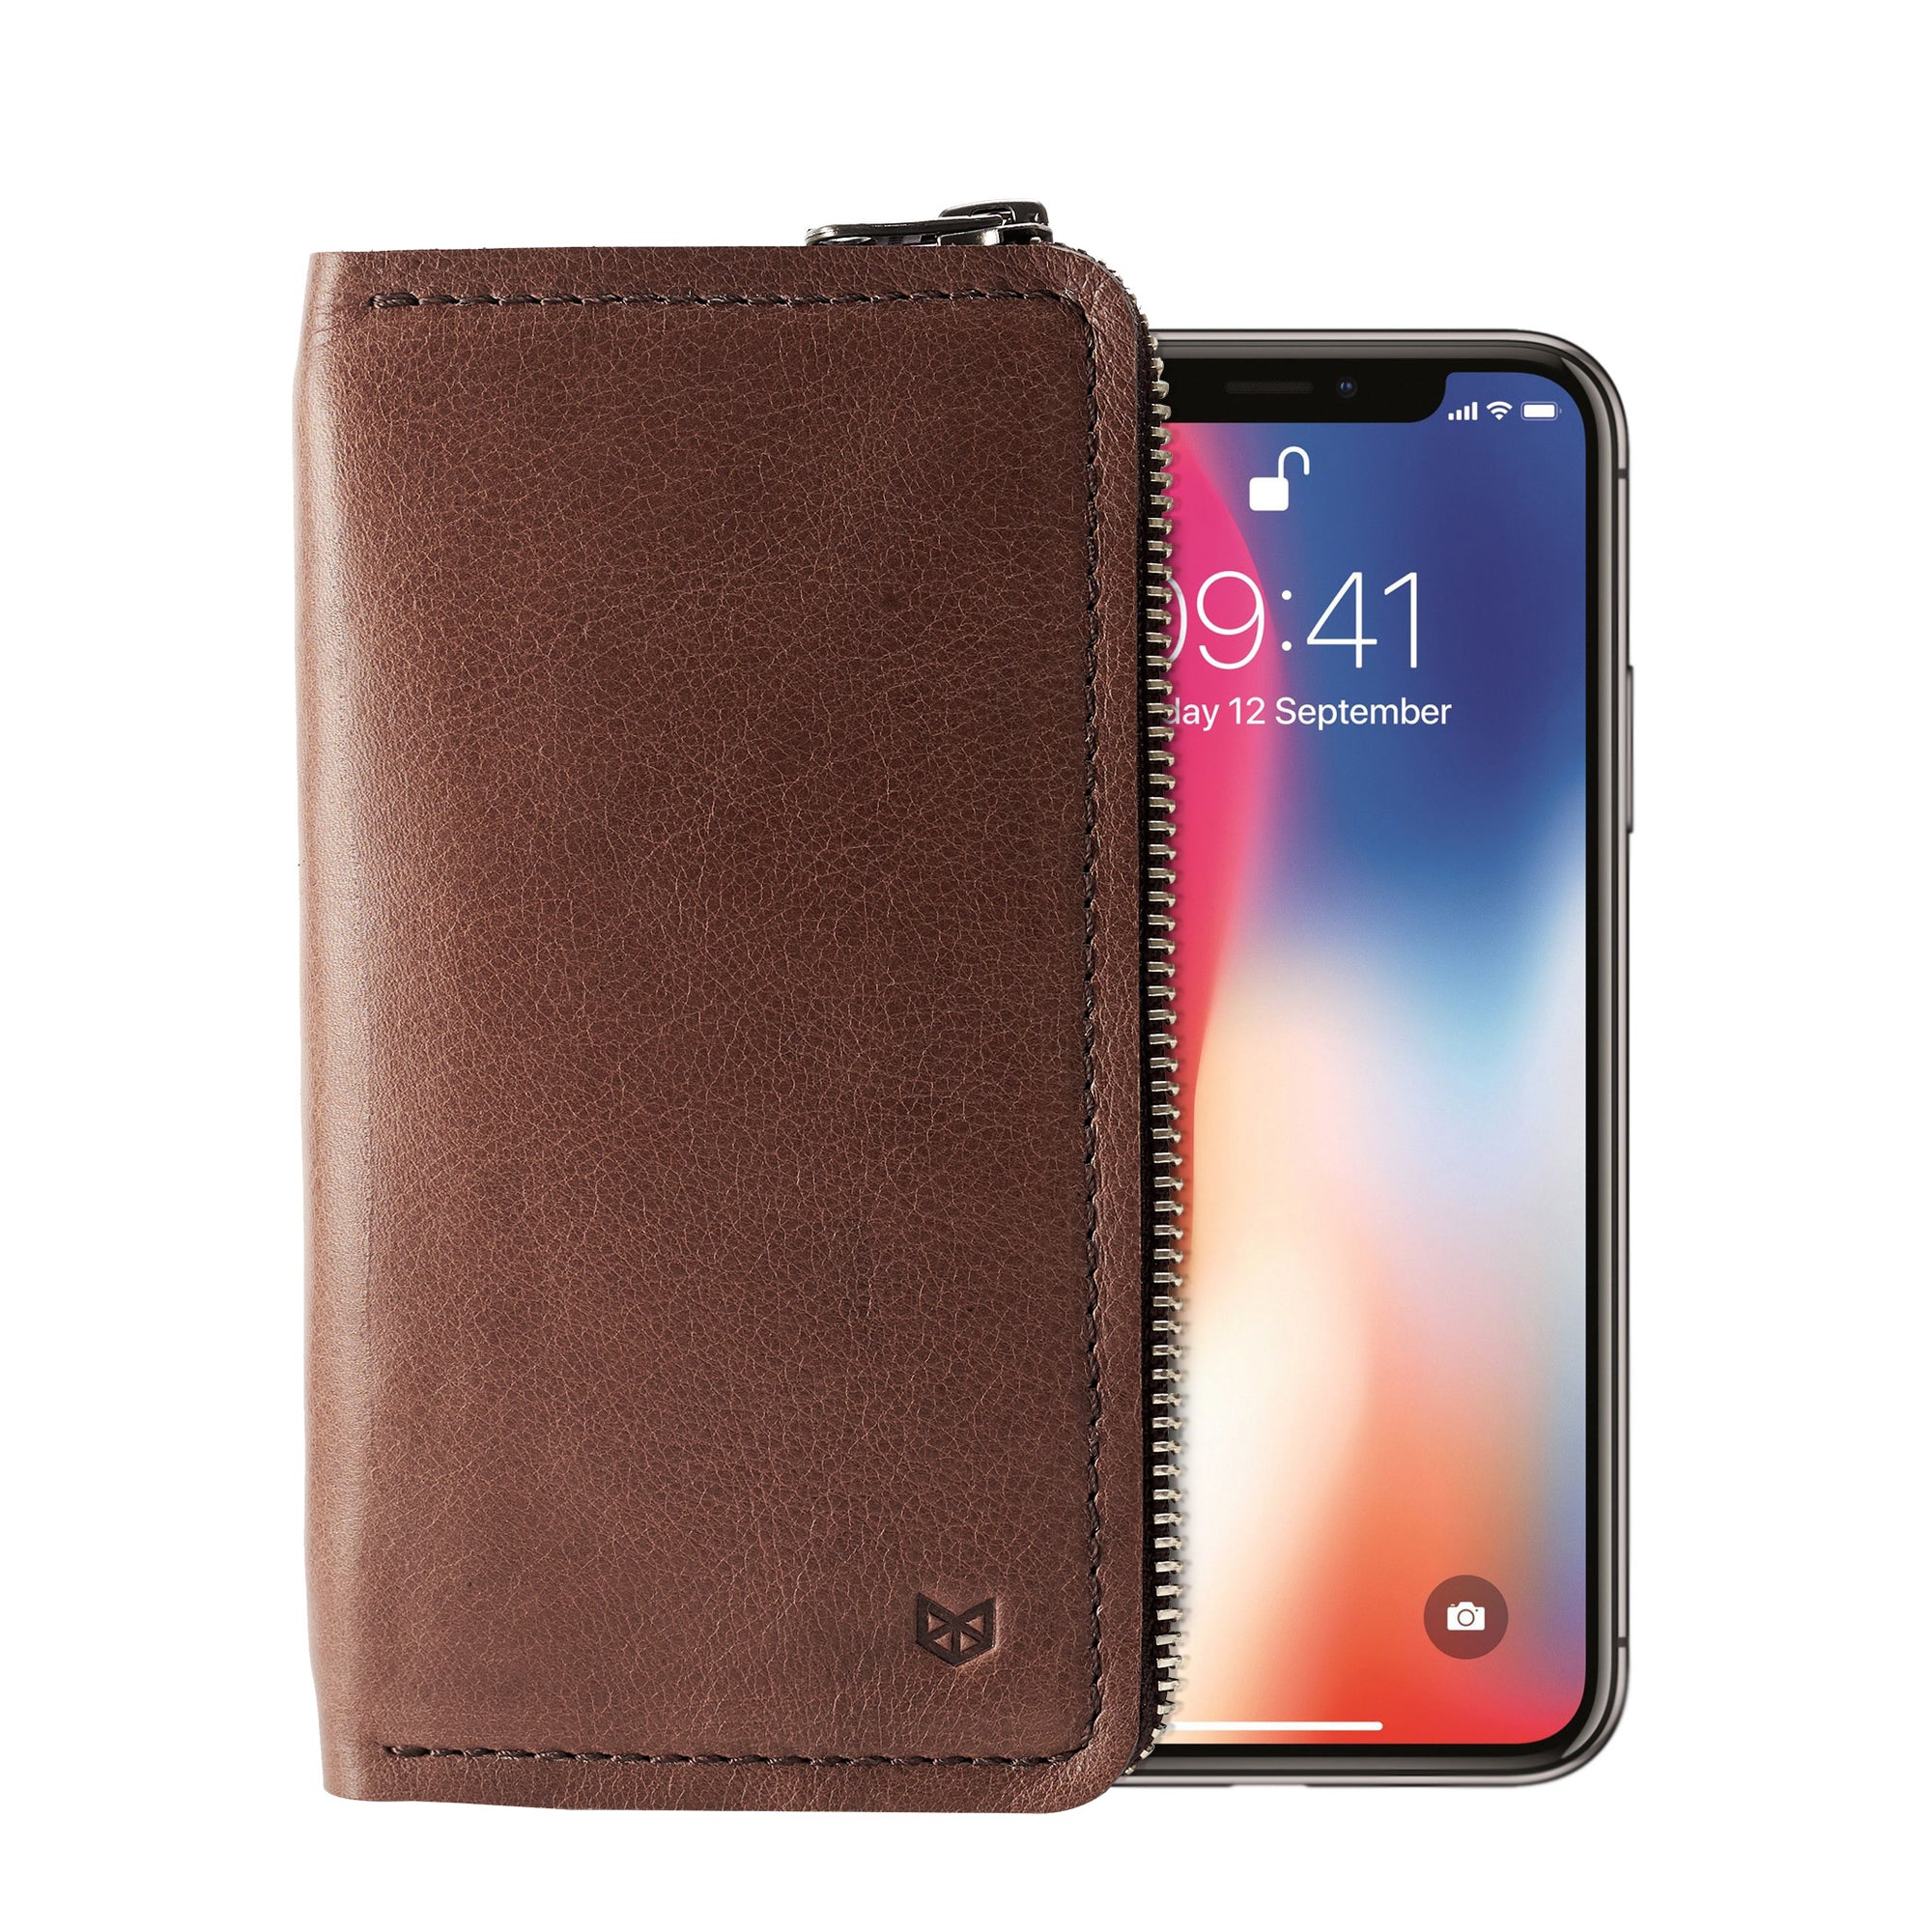 Brown iPhone leather wallet stand case for mens gifts. iPhone x, iPhone 10, iPhone 8 plus leather stand case 